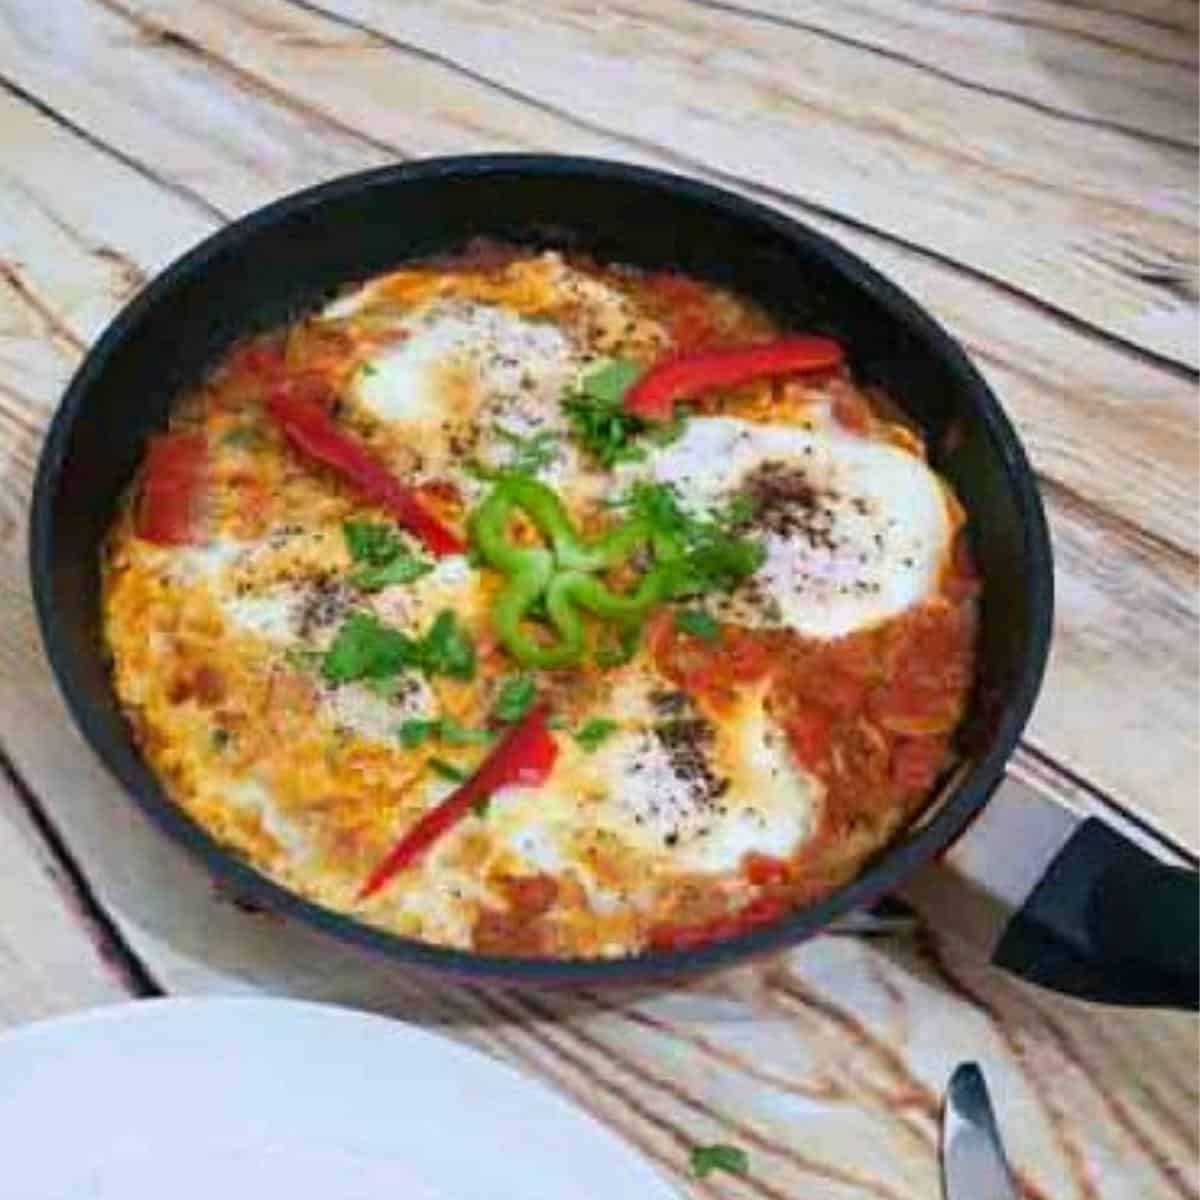 A skillet with shakshuka made with fresh tomatoes.